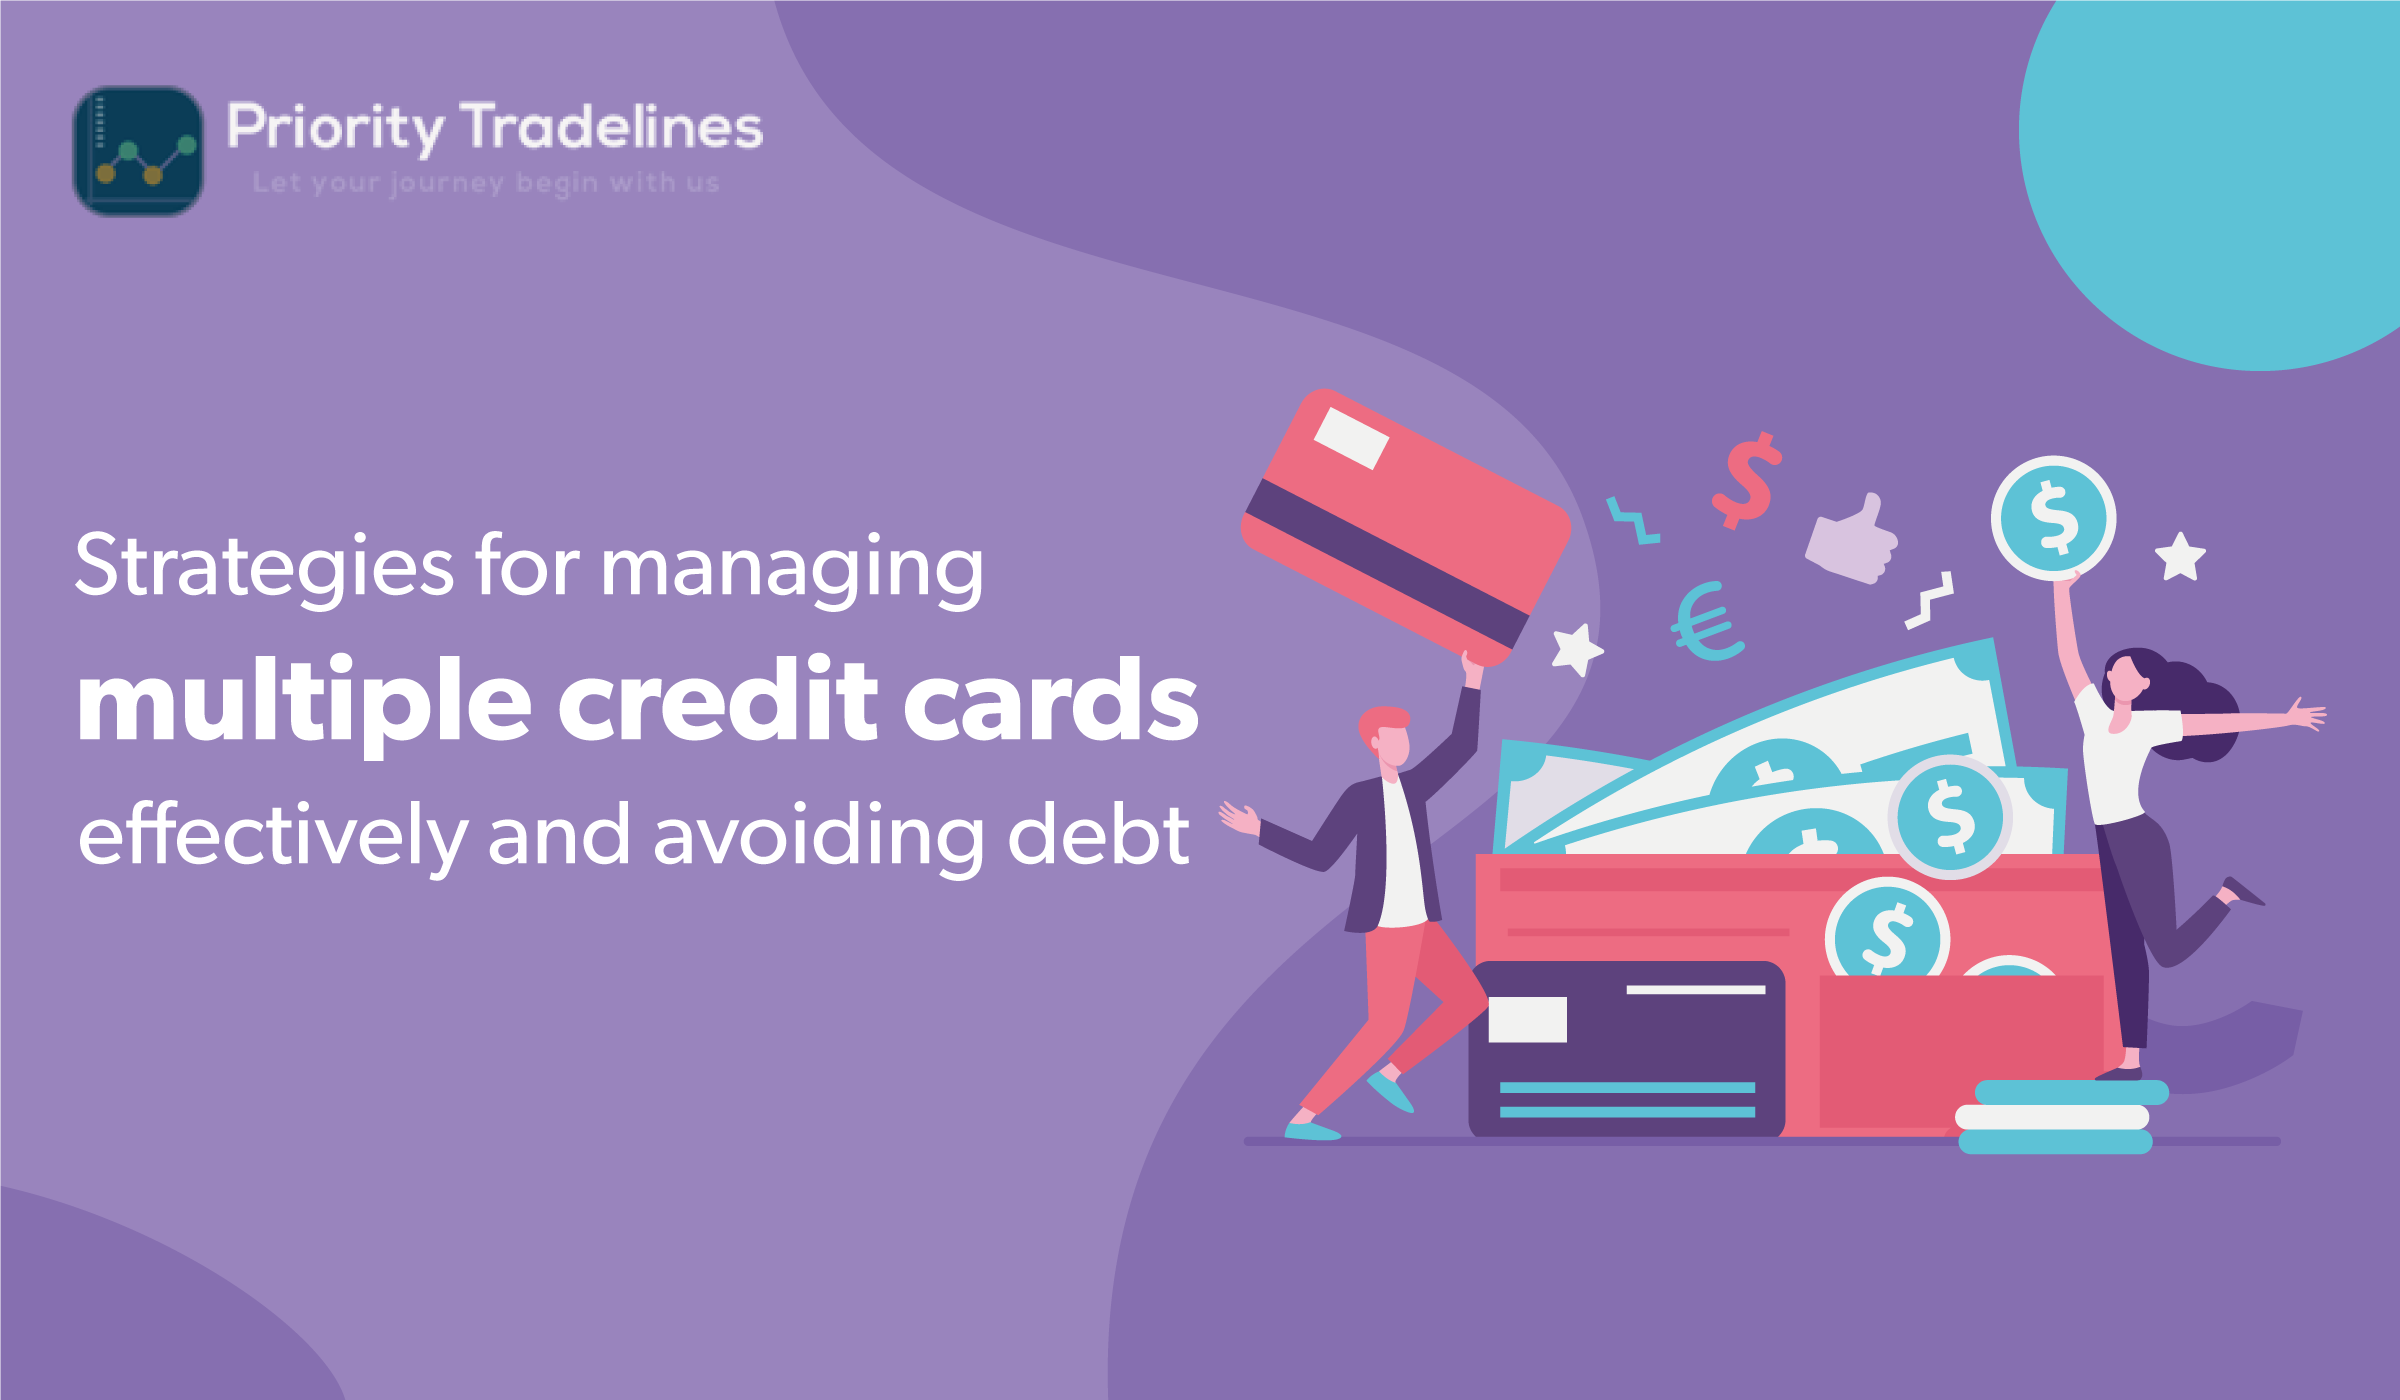 Strategies for managing multiple credit cards effectively and avoiding debt